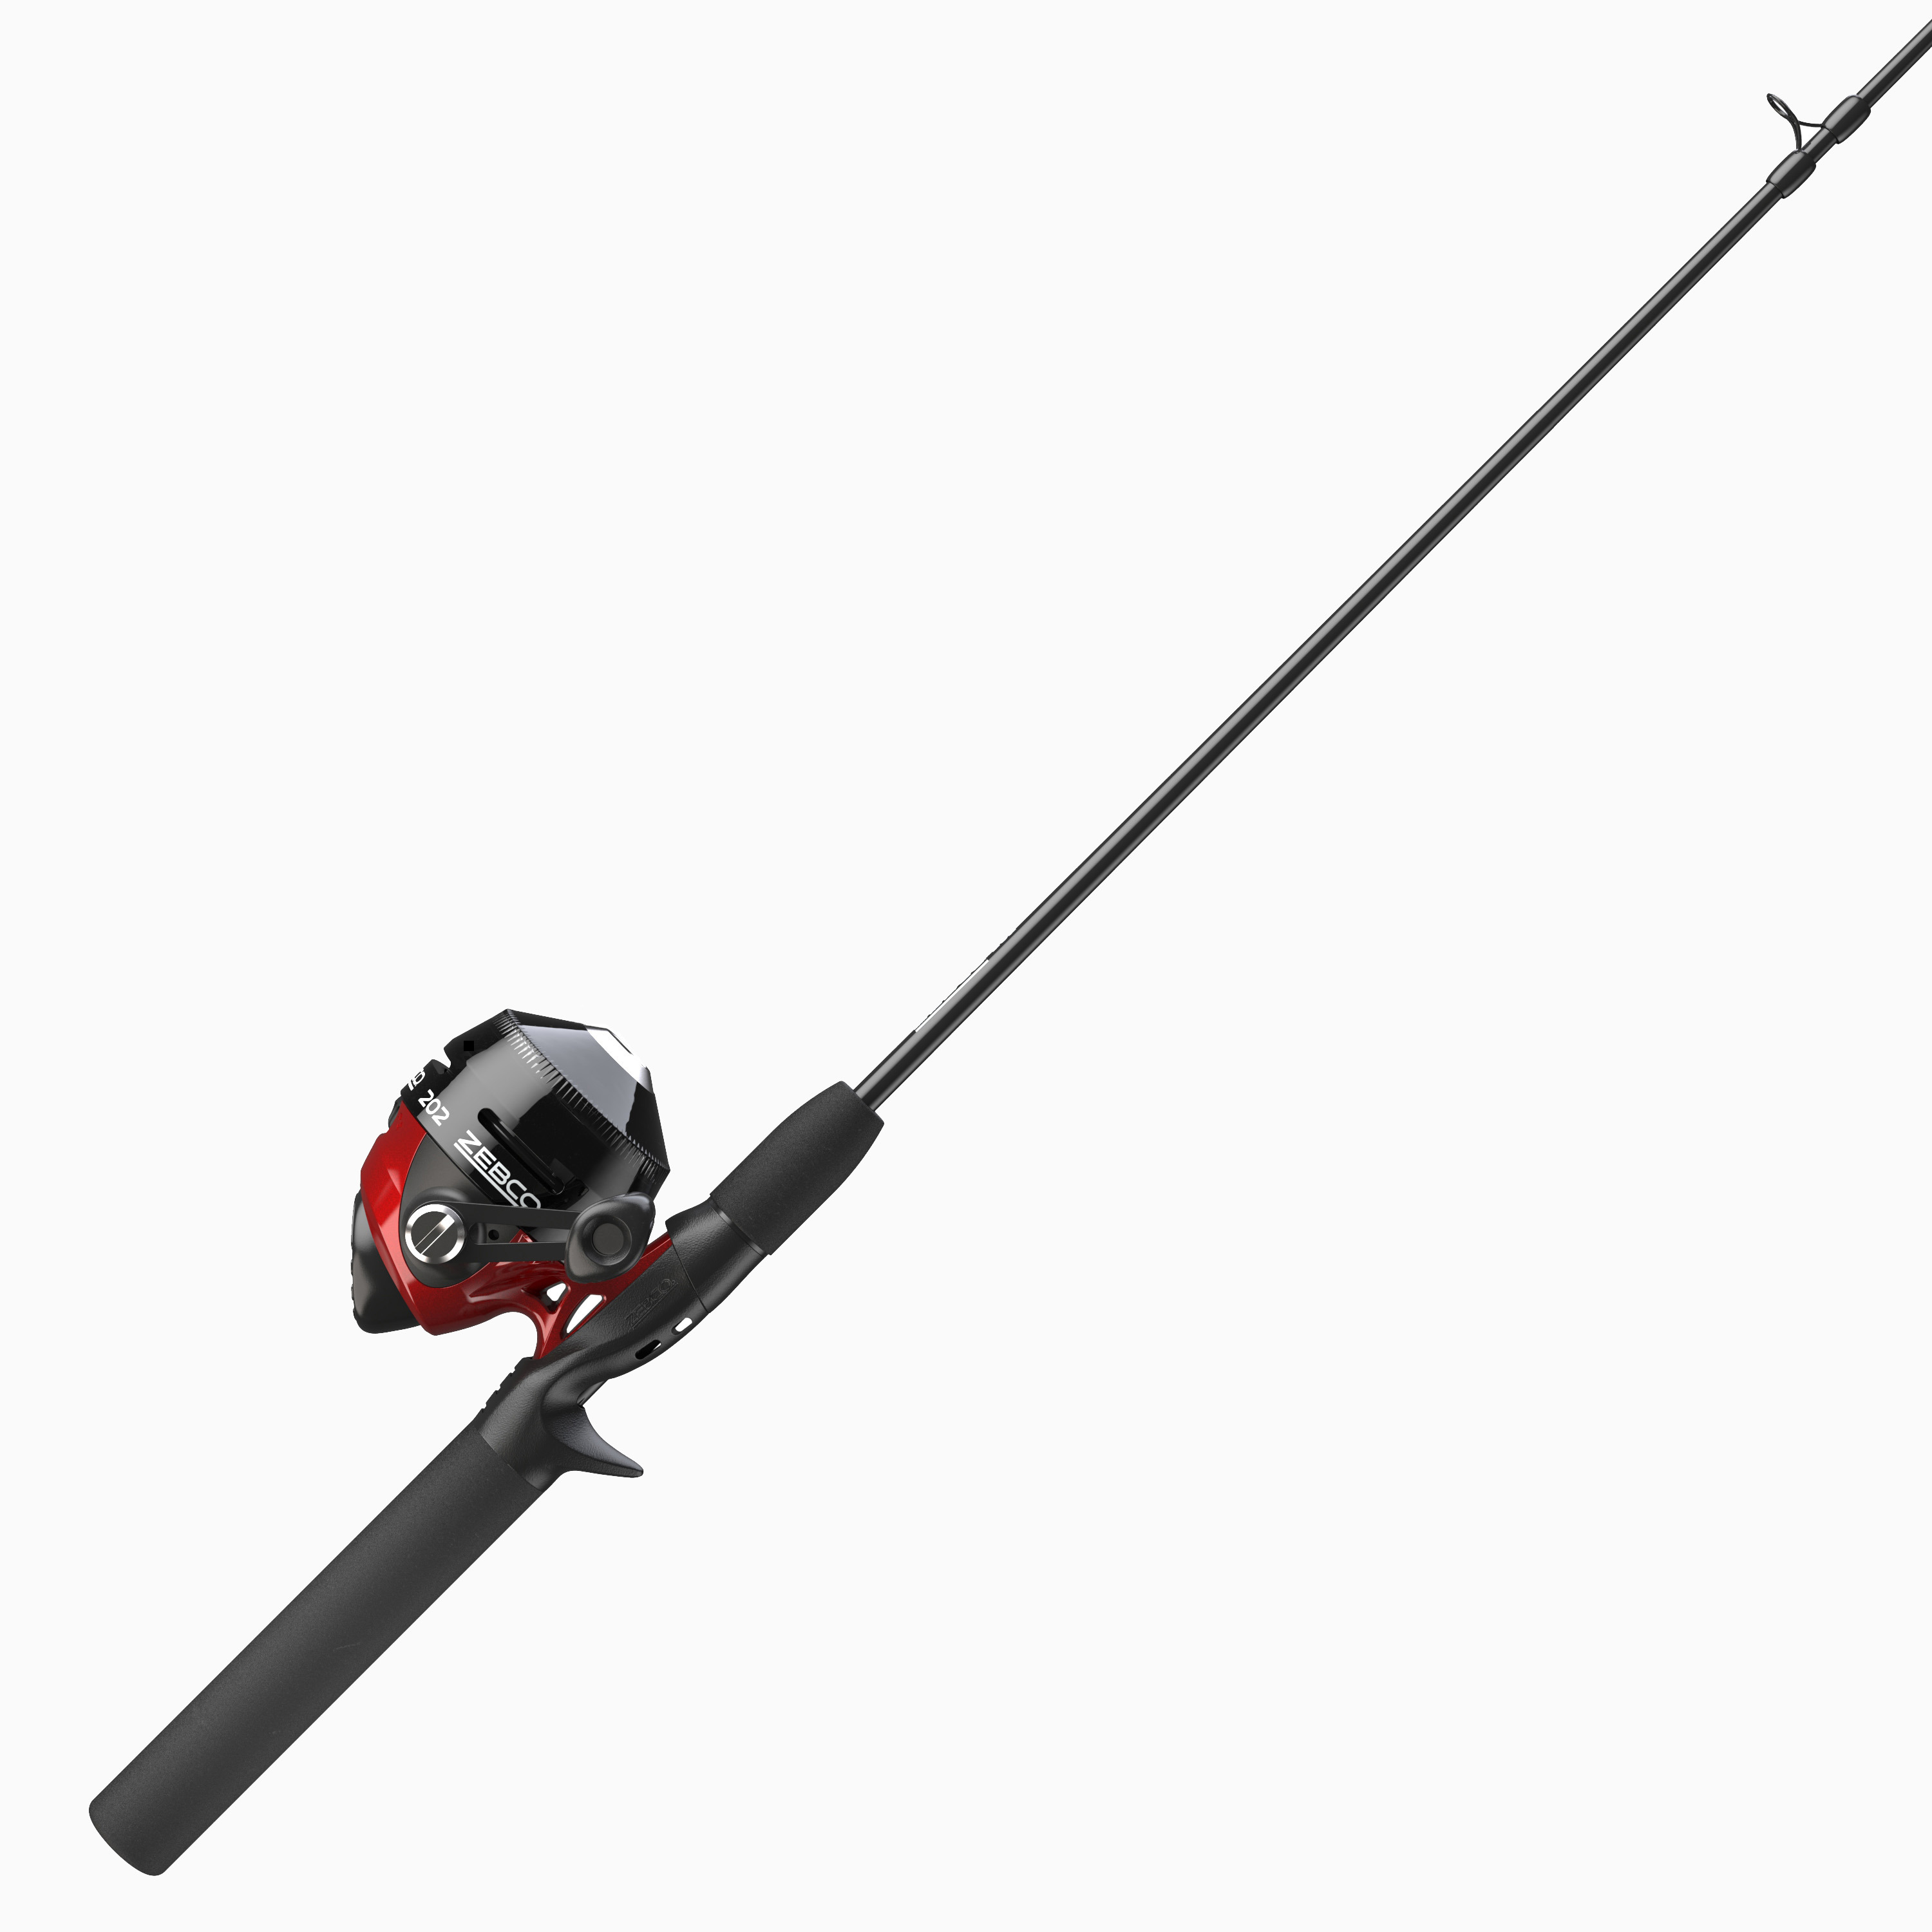 Zebco 808 Bowfisher Reel with 80lb Braid